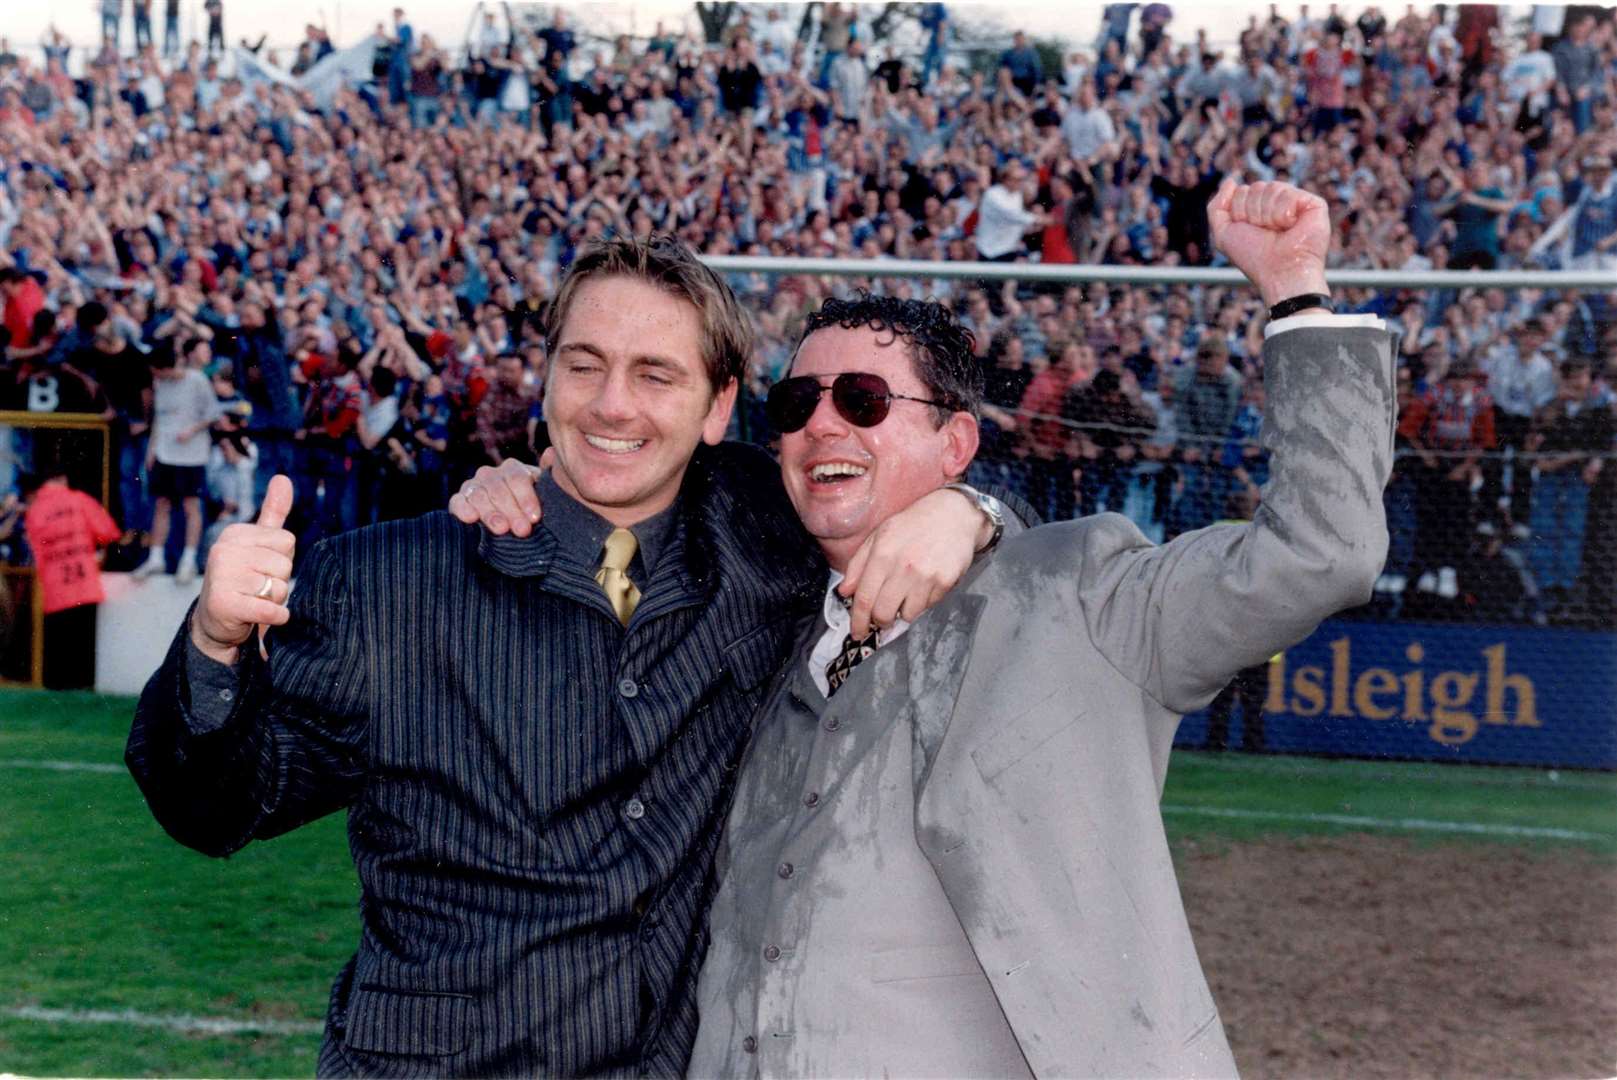 Paul Scally, right, celebrating at Priestfield in 1996 as Gillingham gained promotion from the old Division Three (now League Two)